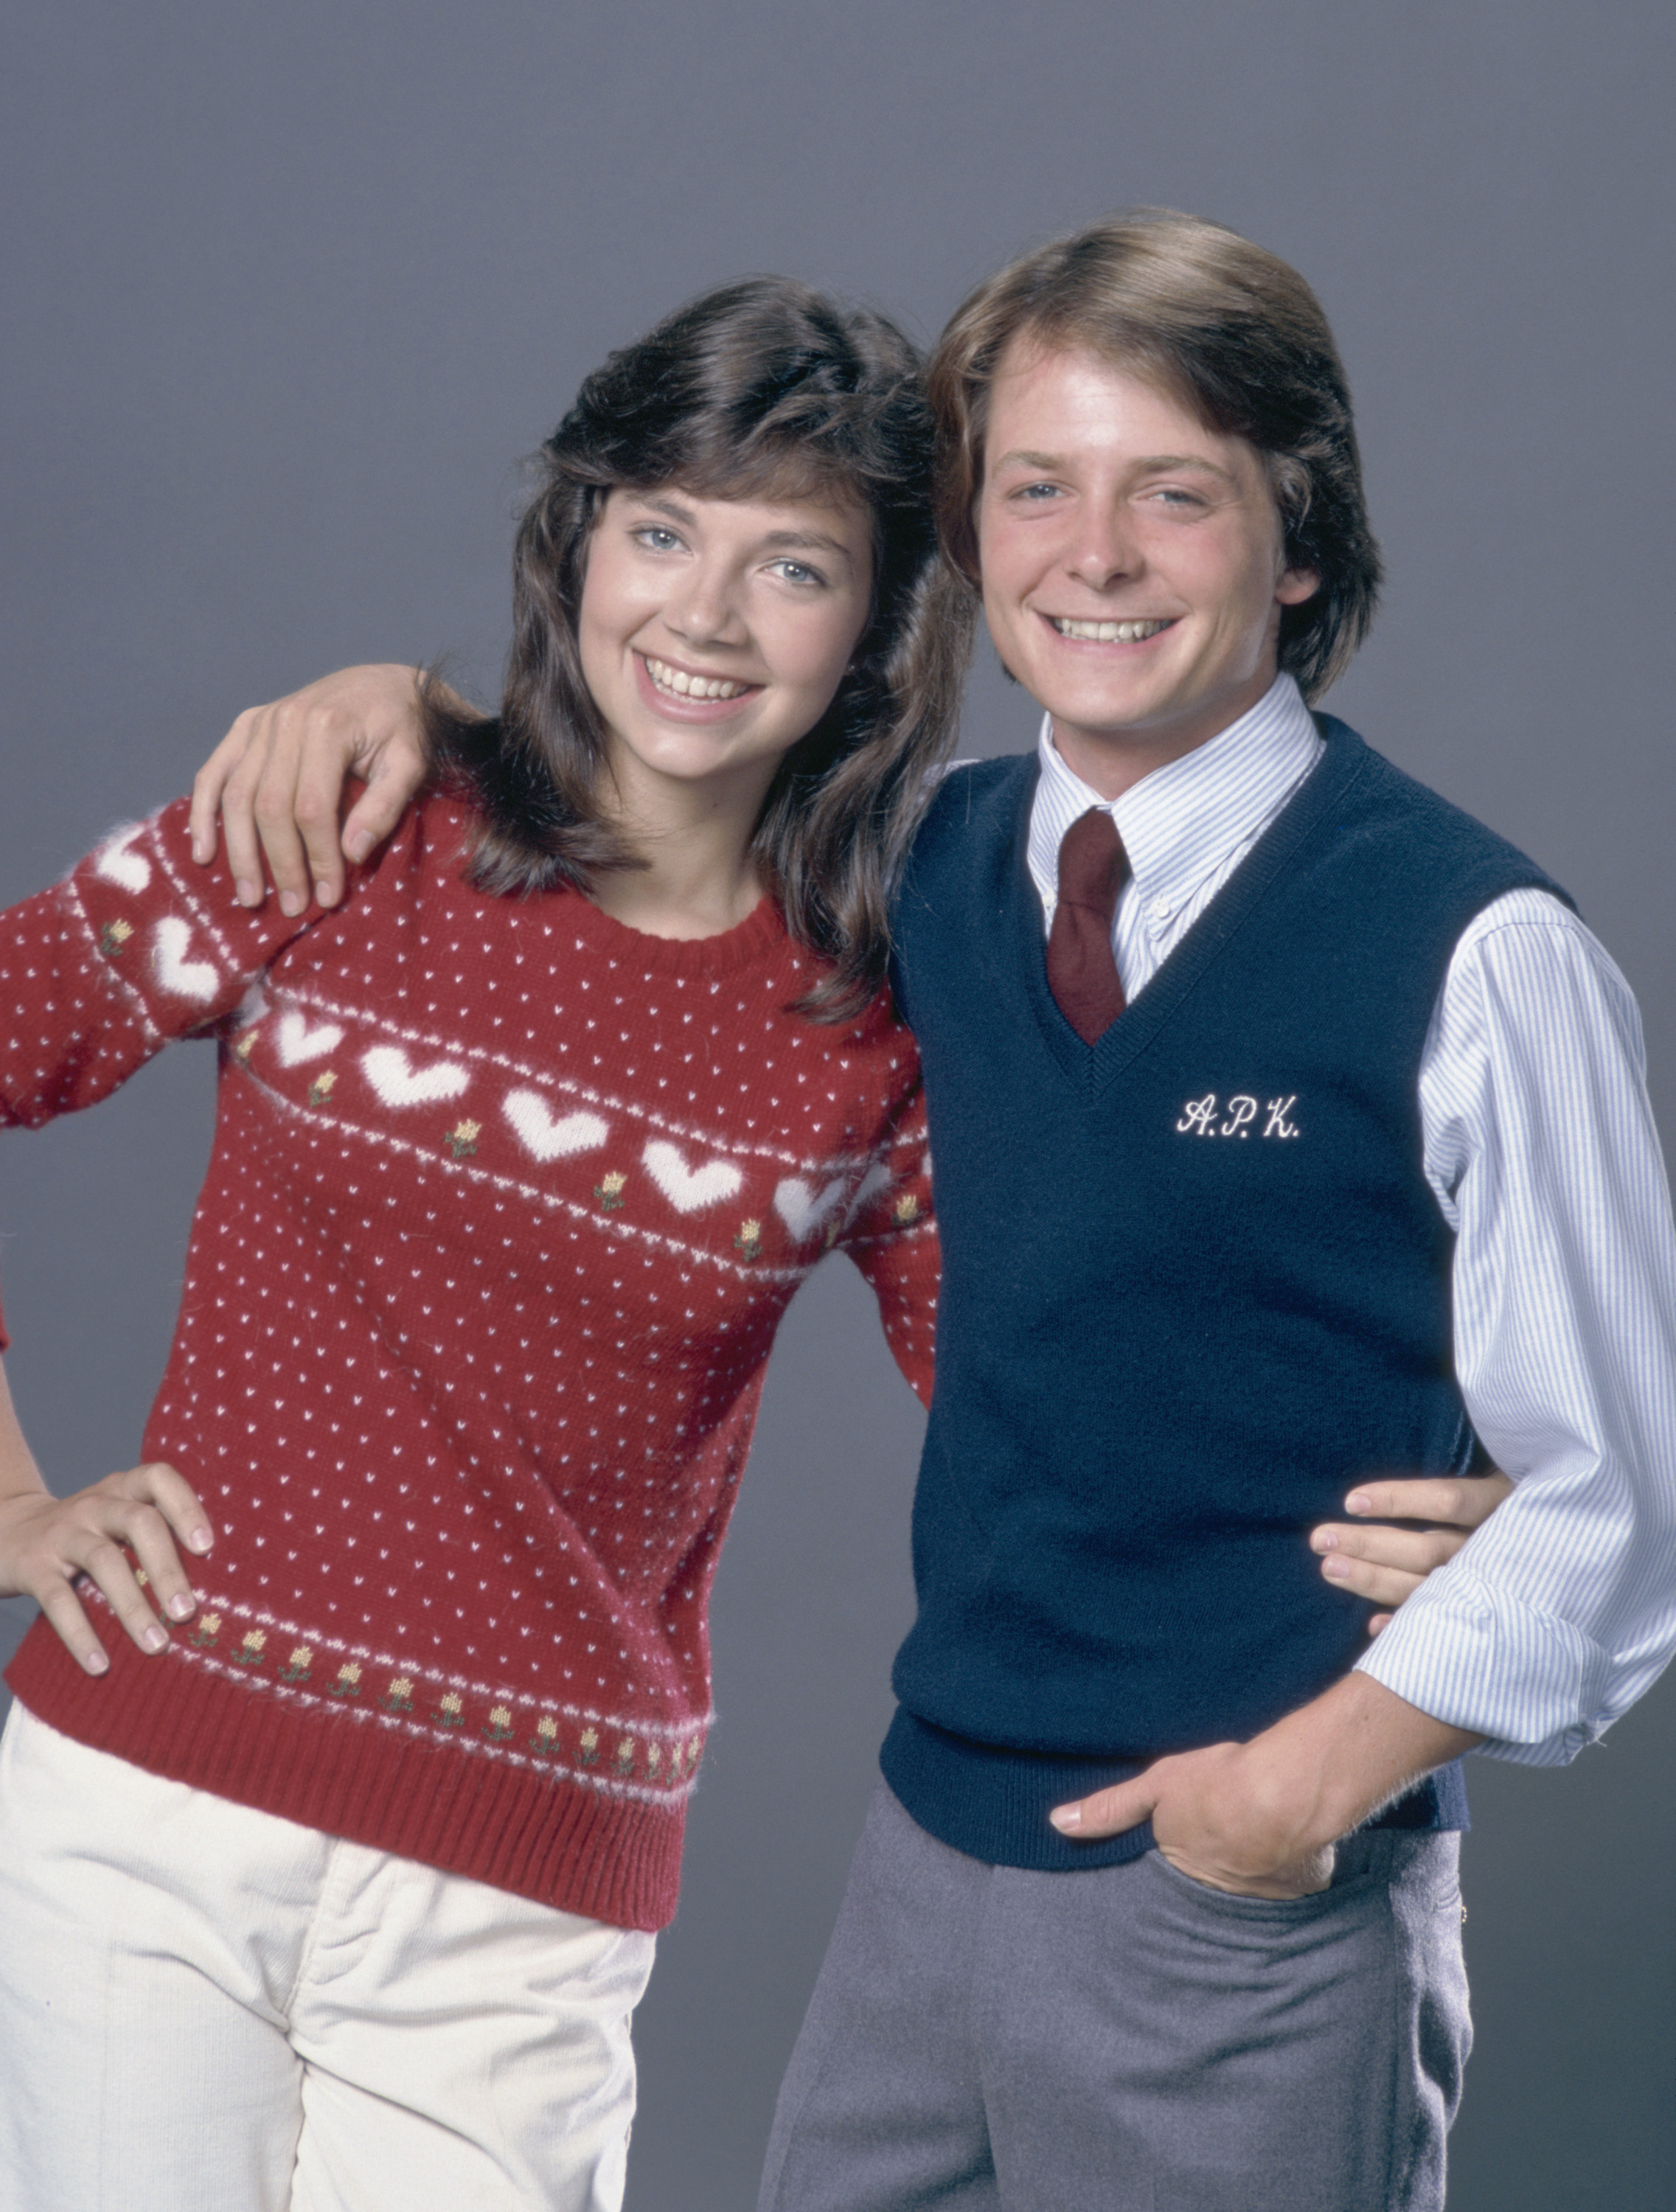 Justine Bateman and Michael J. Fox in "Family Ties," circa 1980s | Source: Getty Images